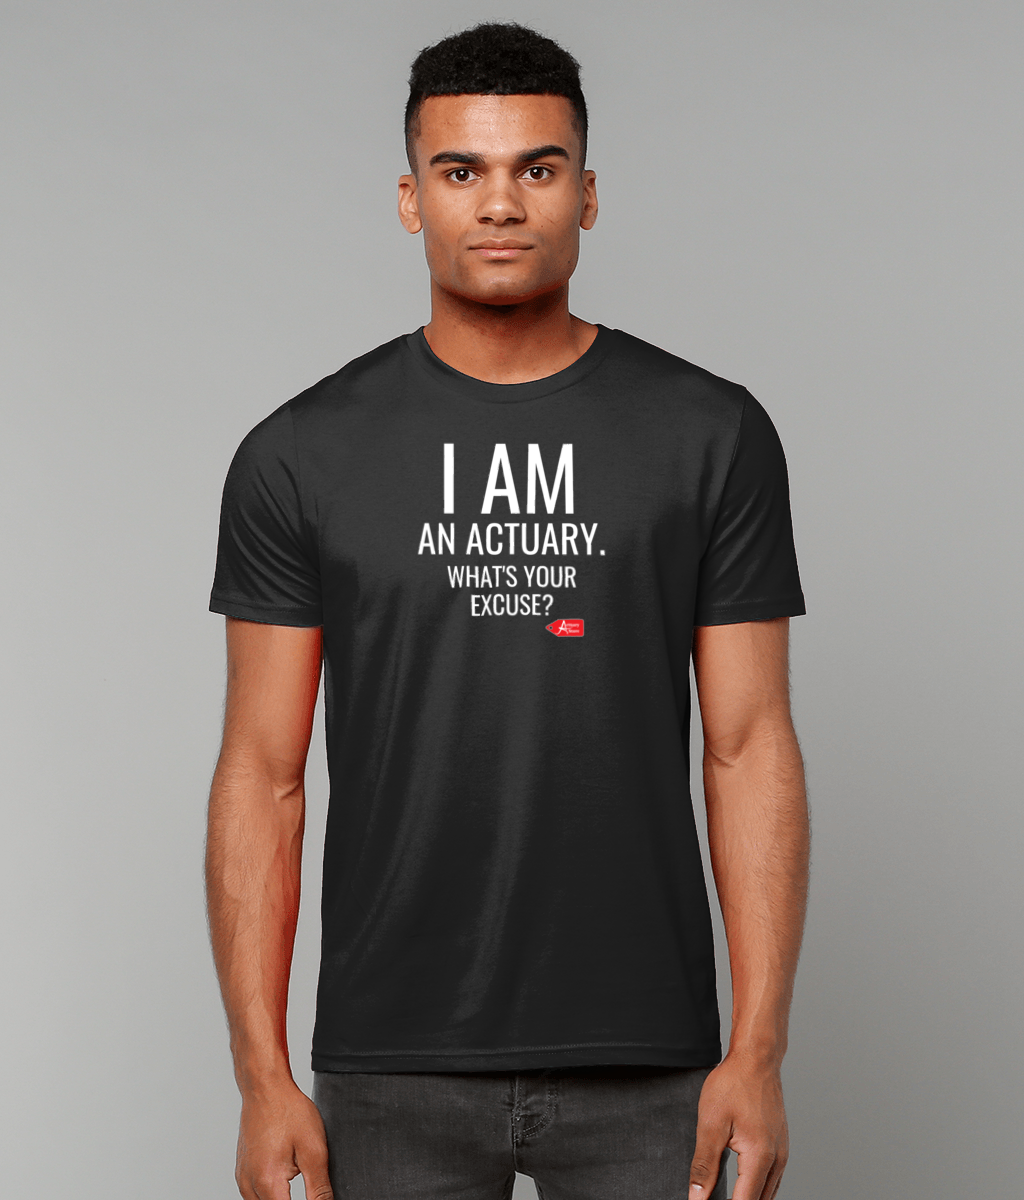 I Am An Actuary. What's Your Excuse T-Shirt